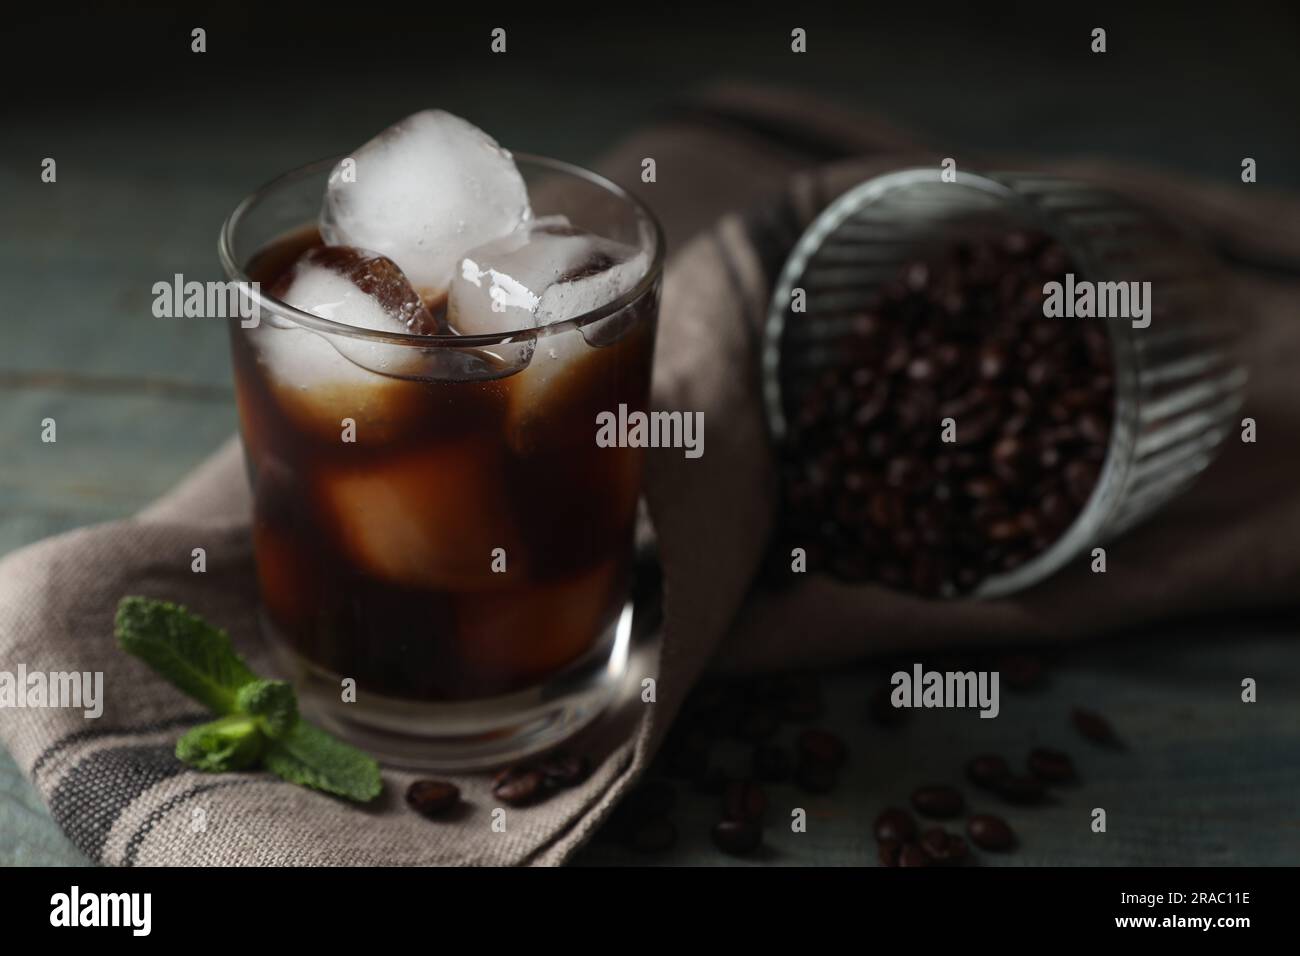 https://c8.alamy.com/comp/2RAC11E/glass-of-delicious-iced-coffee-mint-and-beans-on-table-closeup-space-for-text-2RAC11E.jpg